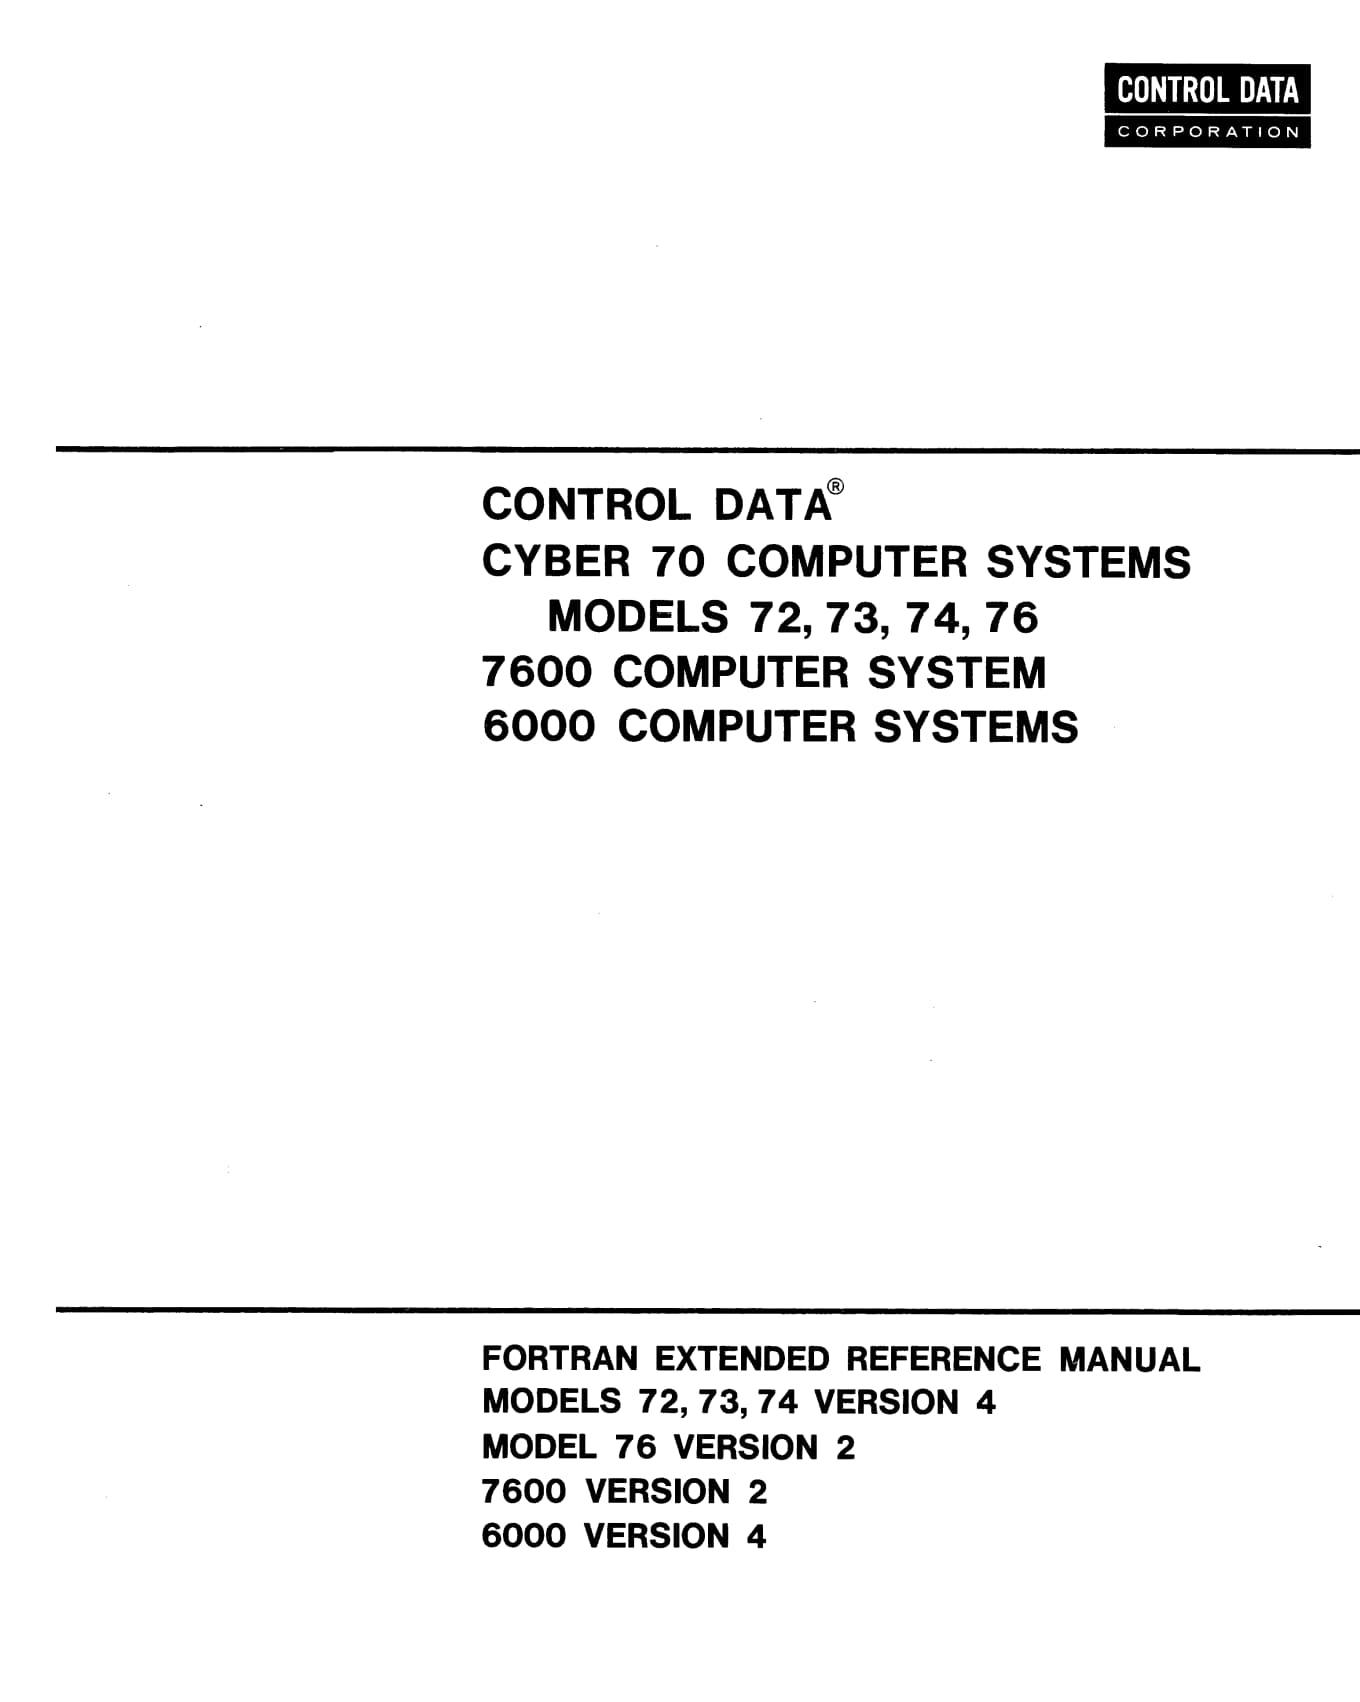 Control Data Corporation Fortran Extended Reference Manual (6000 version 4)